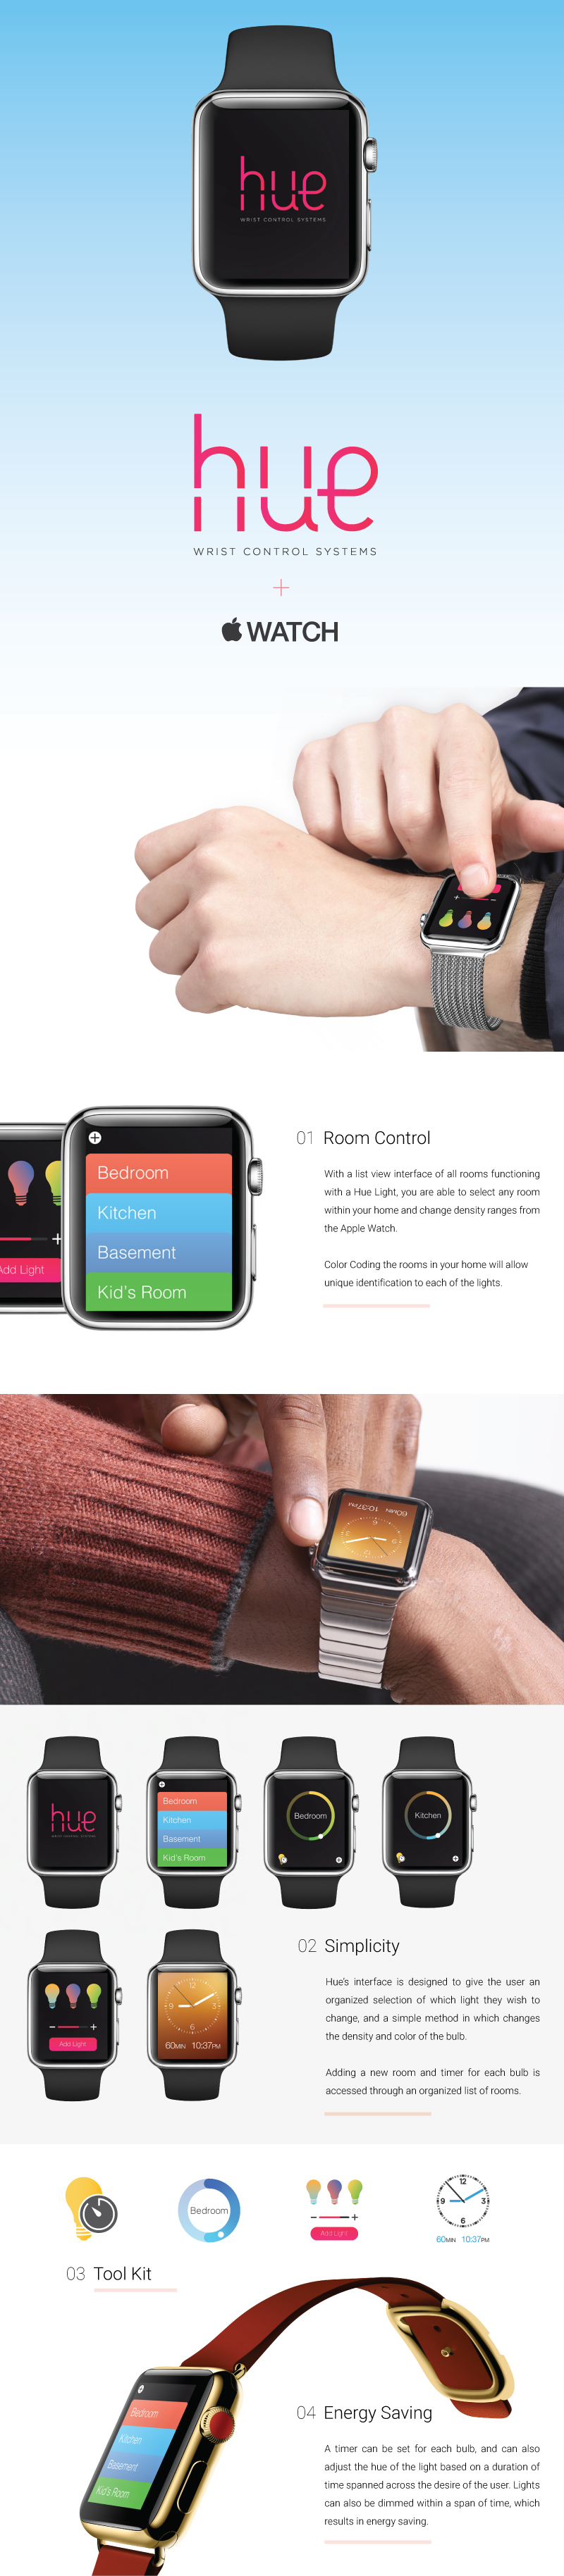 apple Philips apple watch watchkit UI ux Interface Philips hue hue concept